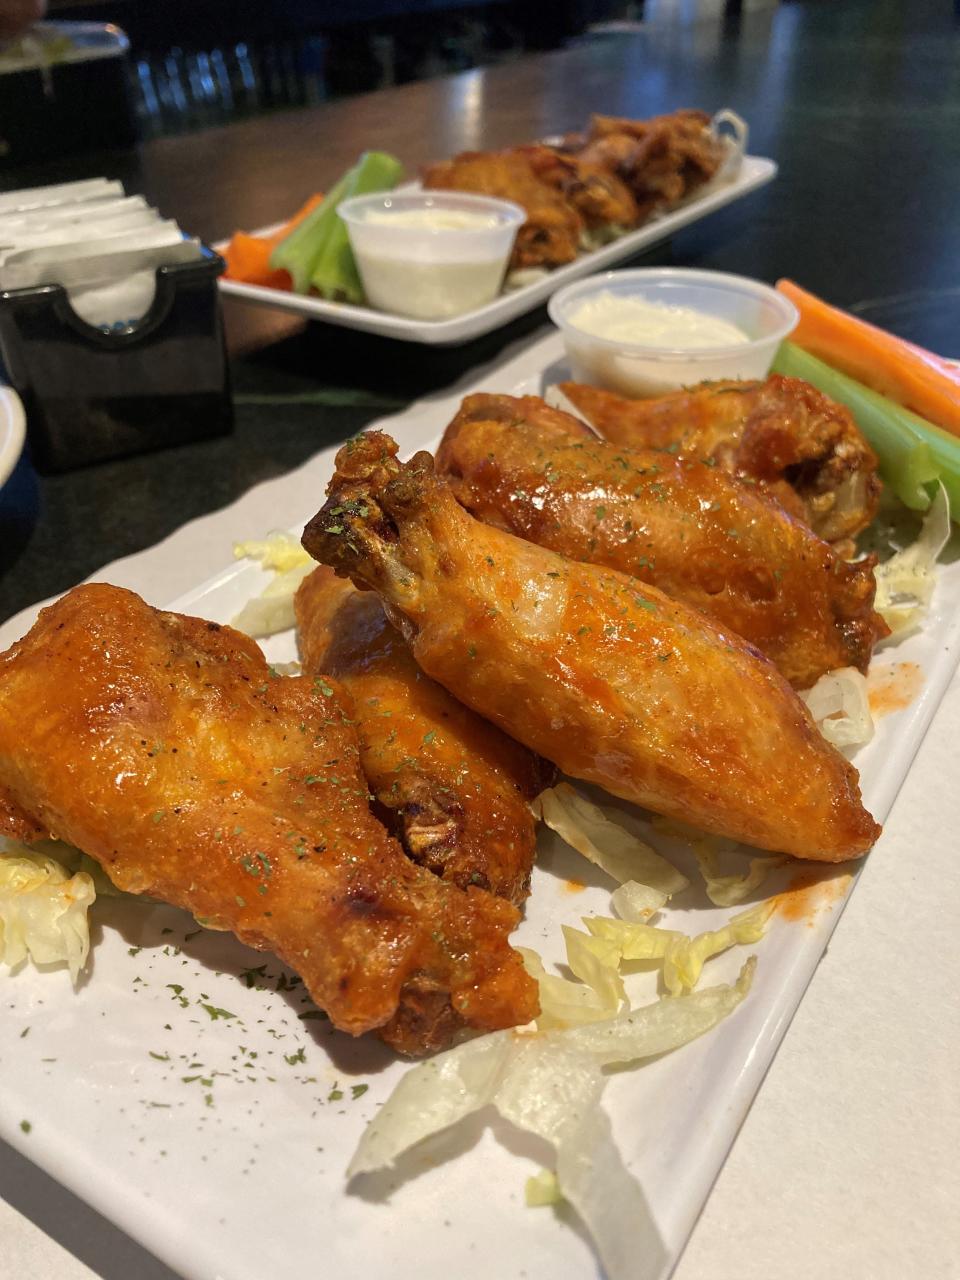 Chicken wings at Game Day Grille in Yorktown. The sports bar has more than 16 flavors of wings to choose from. Photographed Feb. 3, 2022.